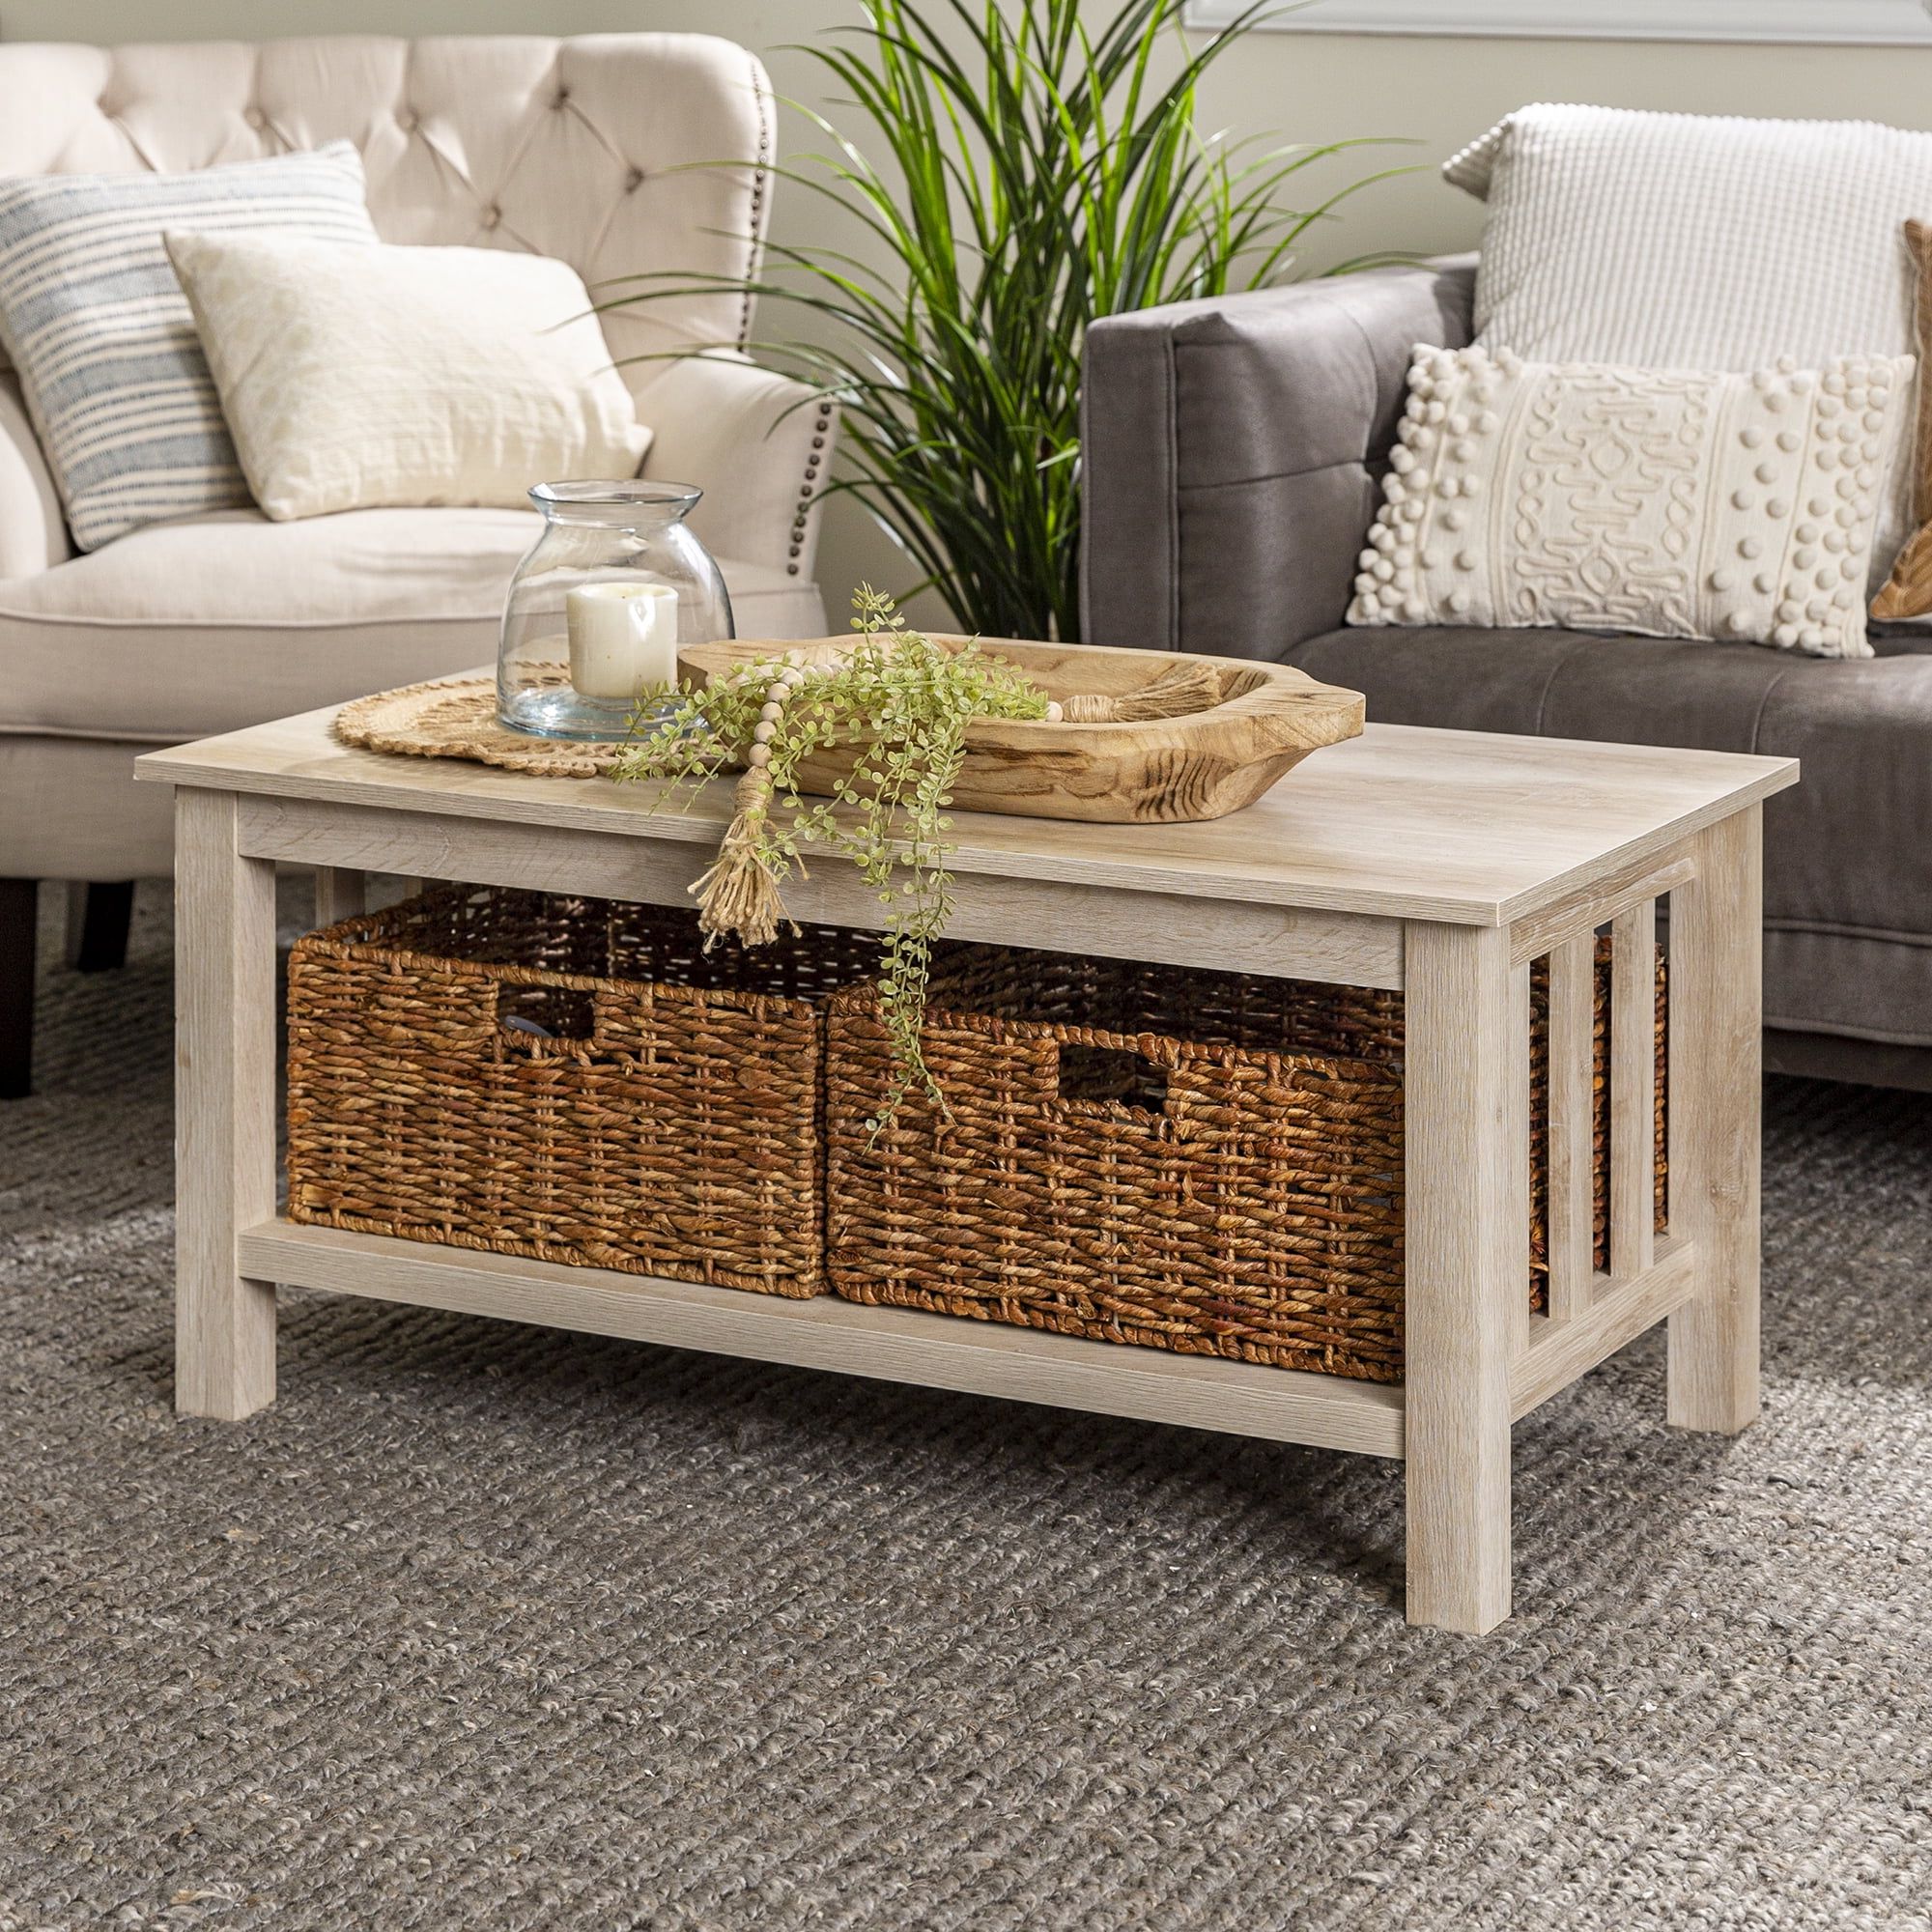 Most Recent Coffee Tables With Storage With Regard To Woven Paths Traditional Storage Coffee Table With Bins, White Oak (View 6 of 15)